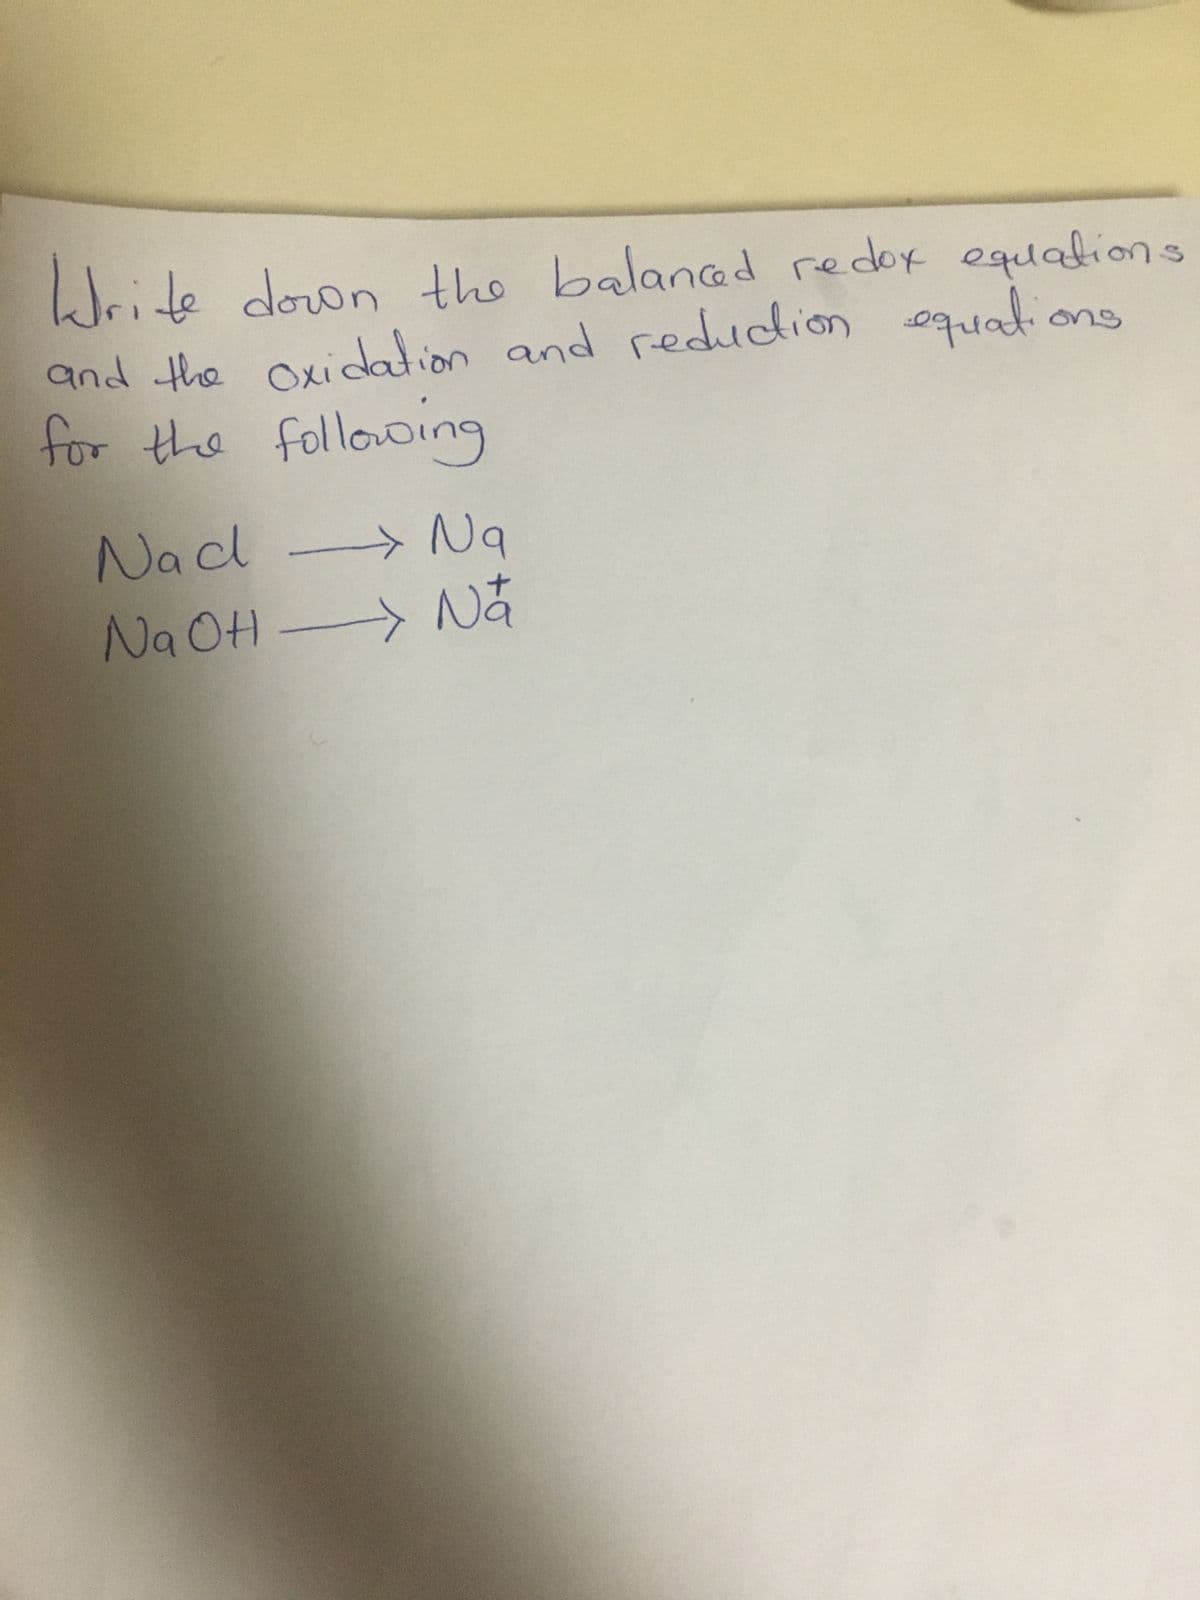 Write down the balanced redox equation
and the oxidation and reduction equatio
for the following
>
Nac → Nq
Na OH- Na
<
ons